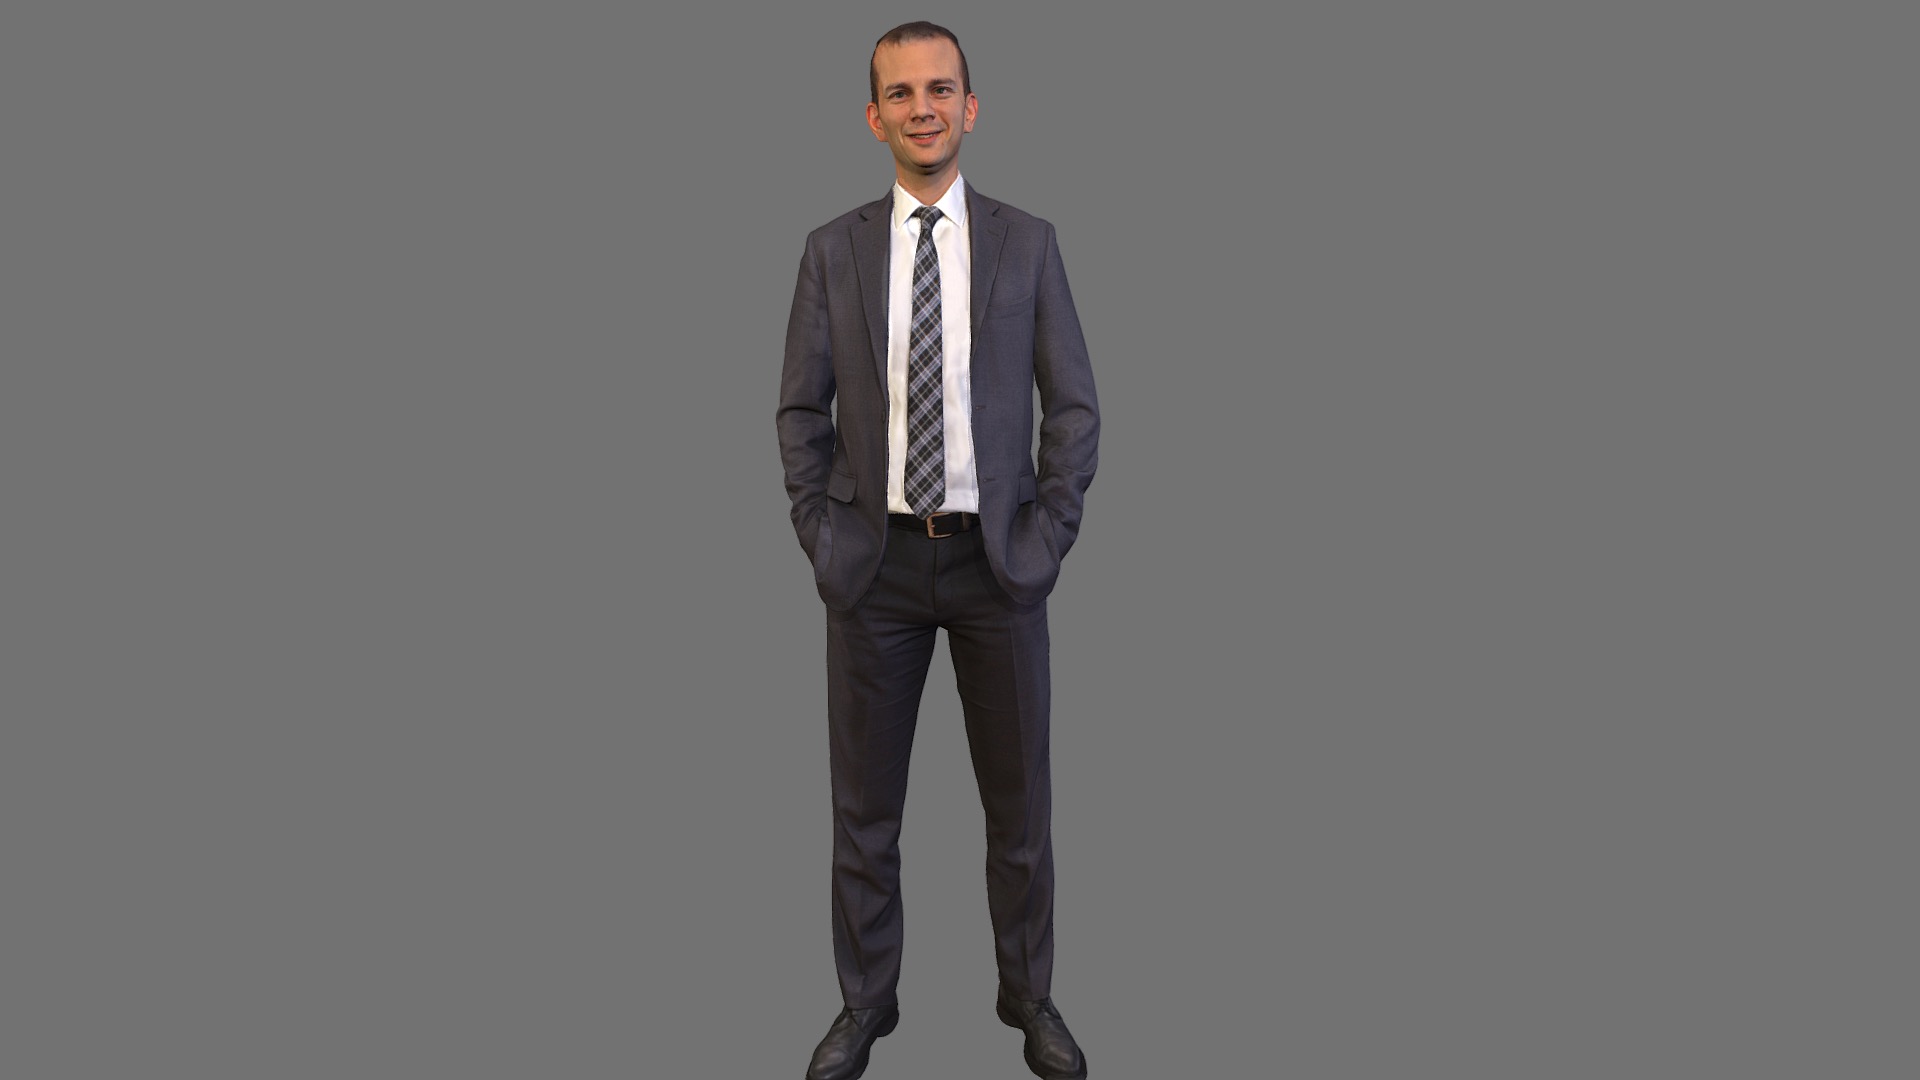 3D model No4 – Suit Guy Standing - This is a 3D model of the No4 - Suit Guy Standing. The 3D model is about a man in a suit.